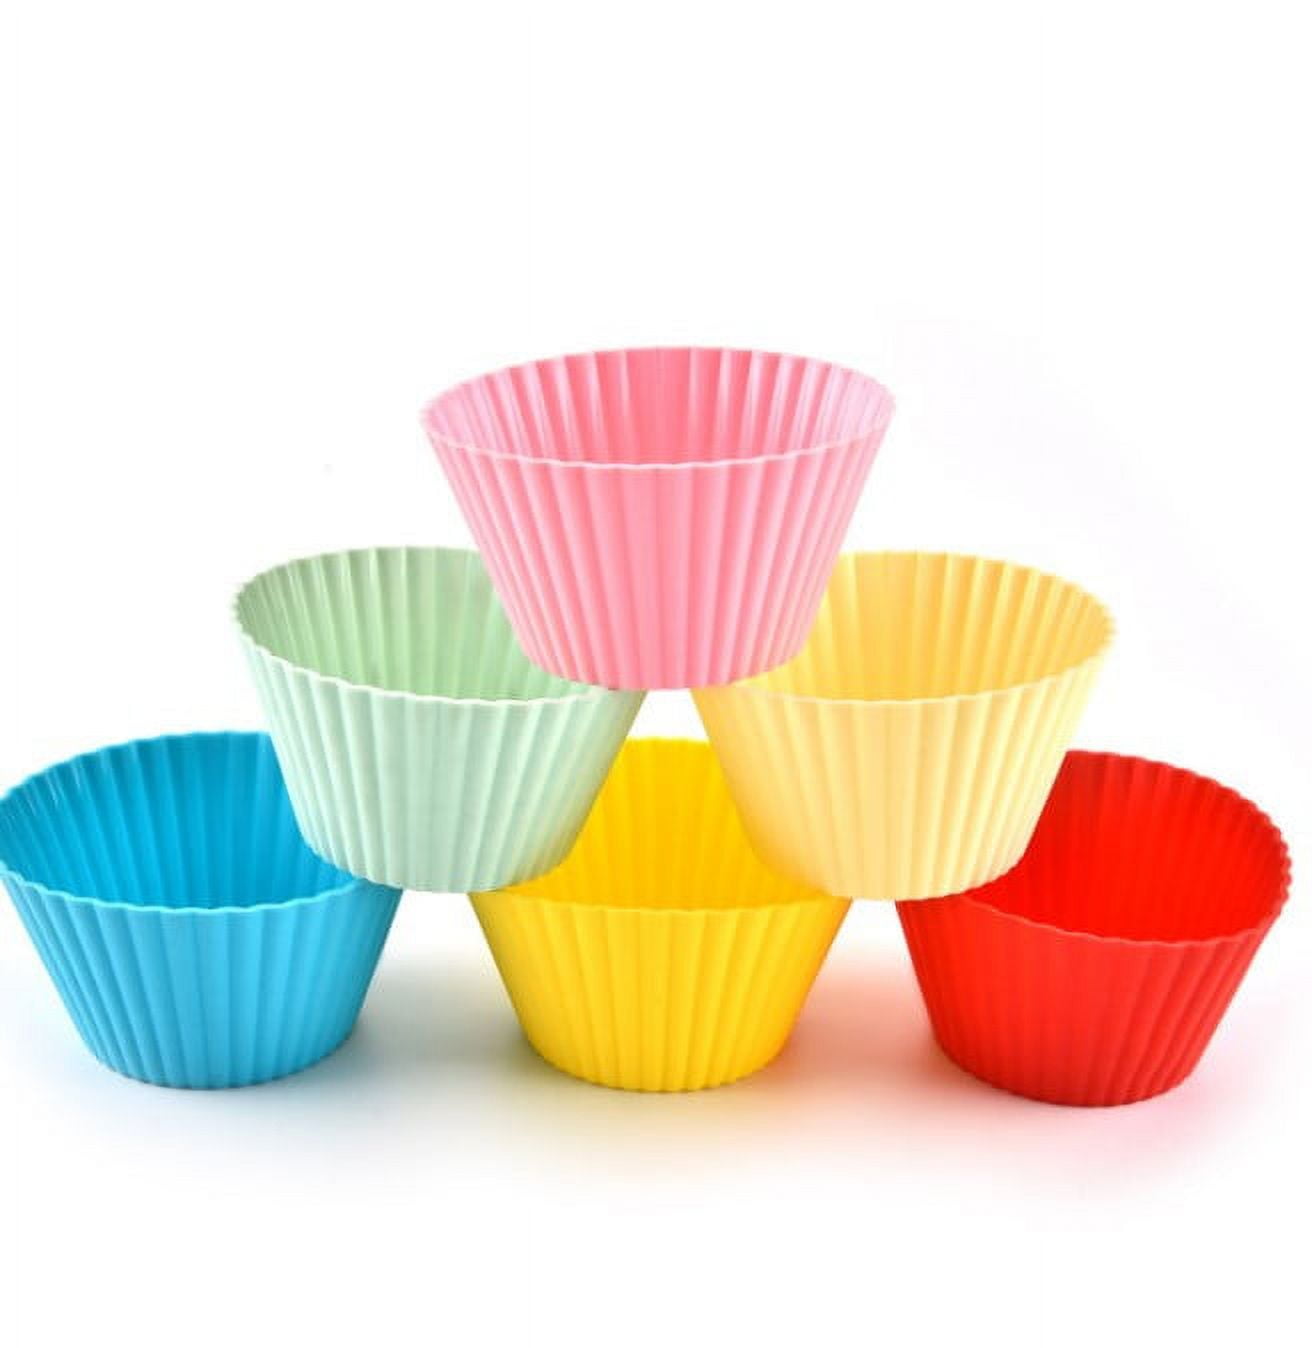  Silicone Baking Cups/Jumbo Size / 13 Reusable Nonstick